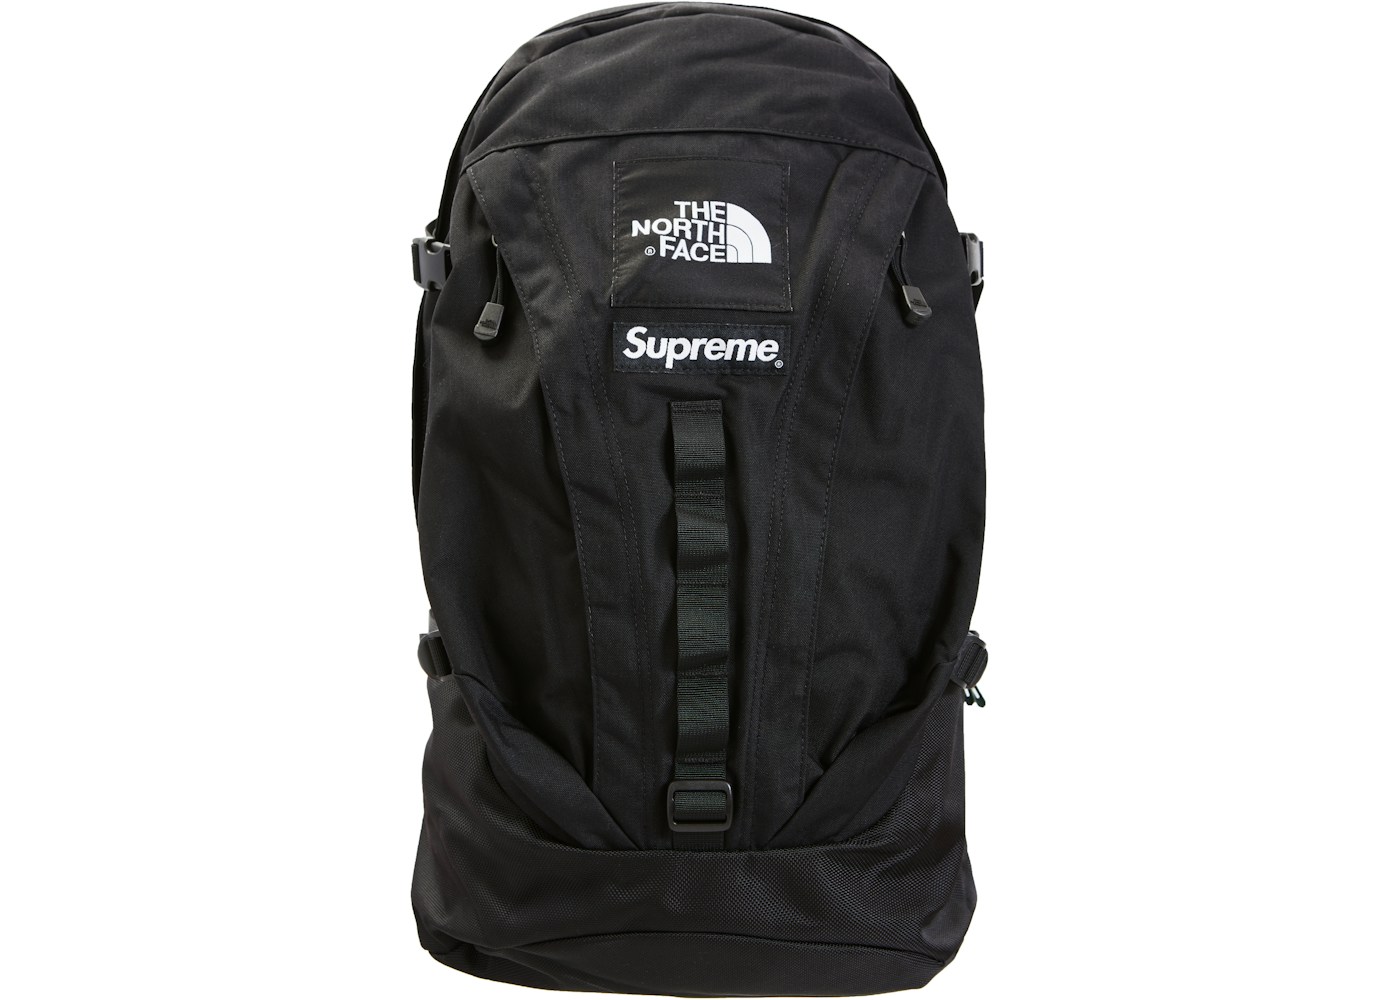 North Face Expedition Backpack Black